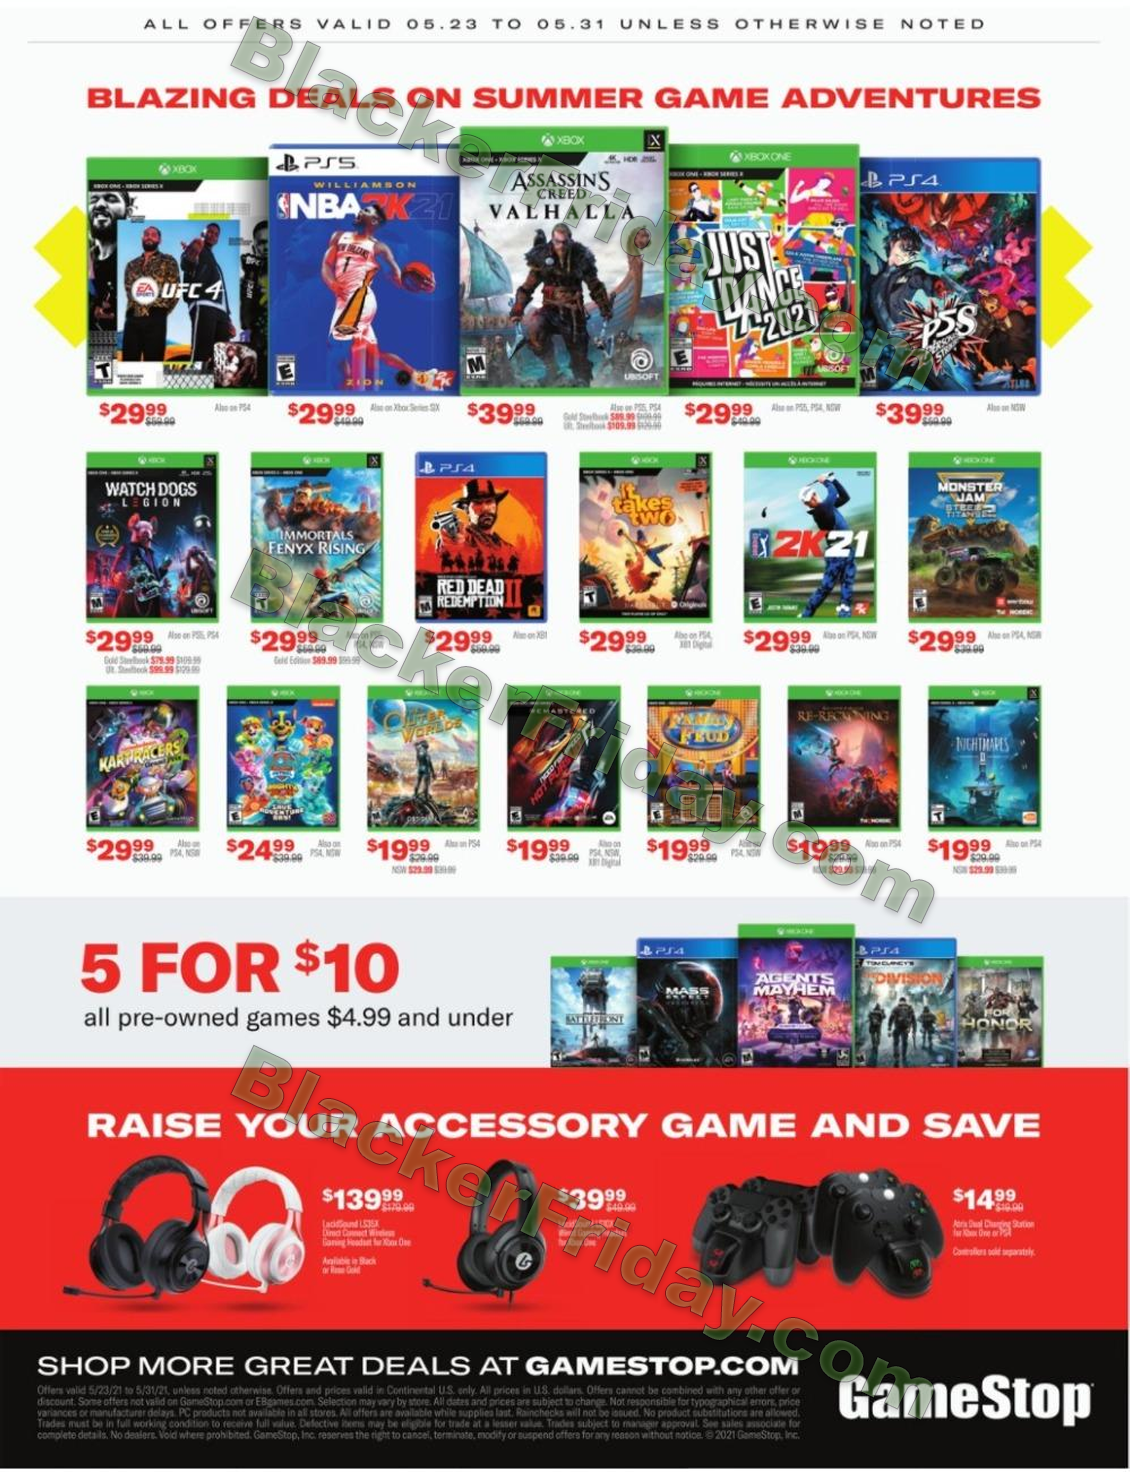 GameStop Memorial Day 2022 Sale - What to Expect - Blacker Friday